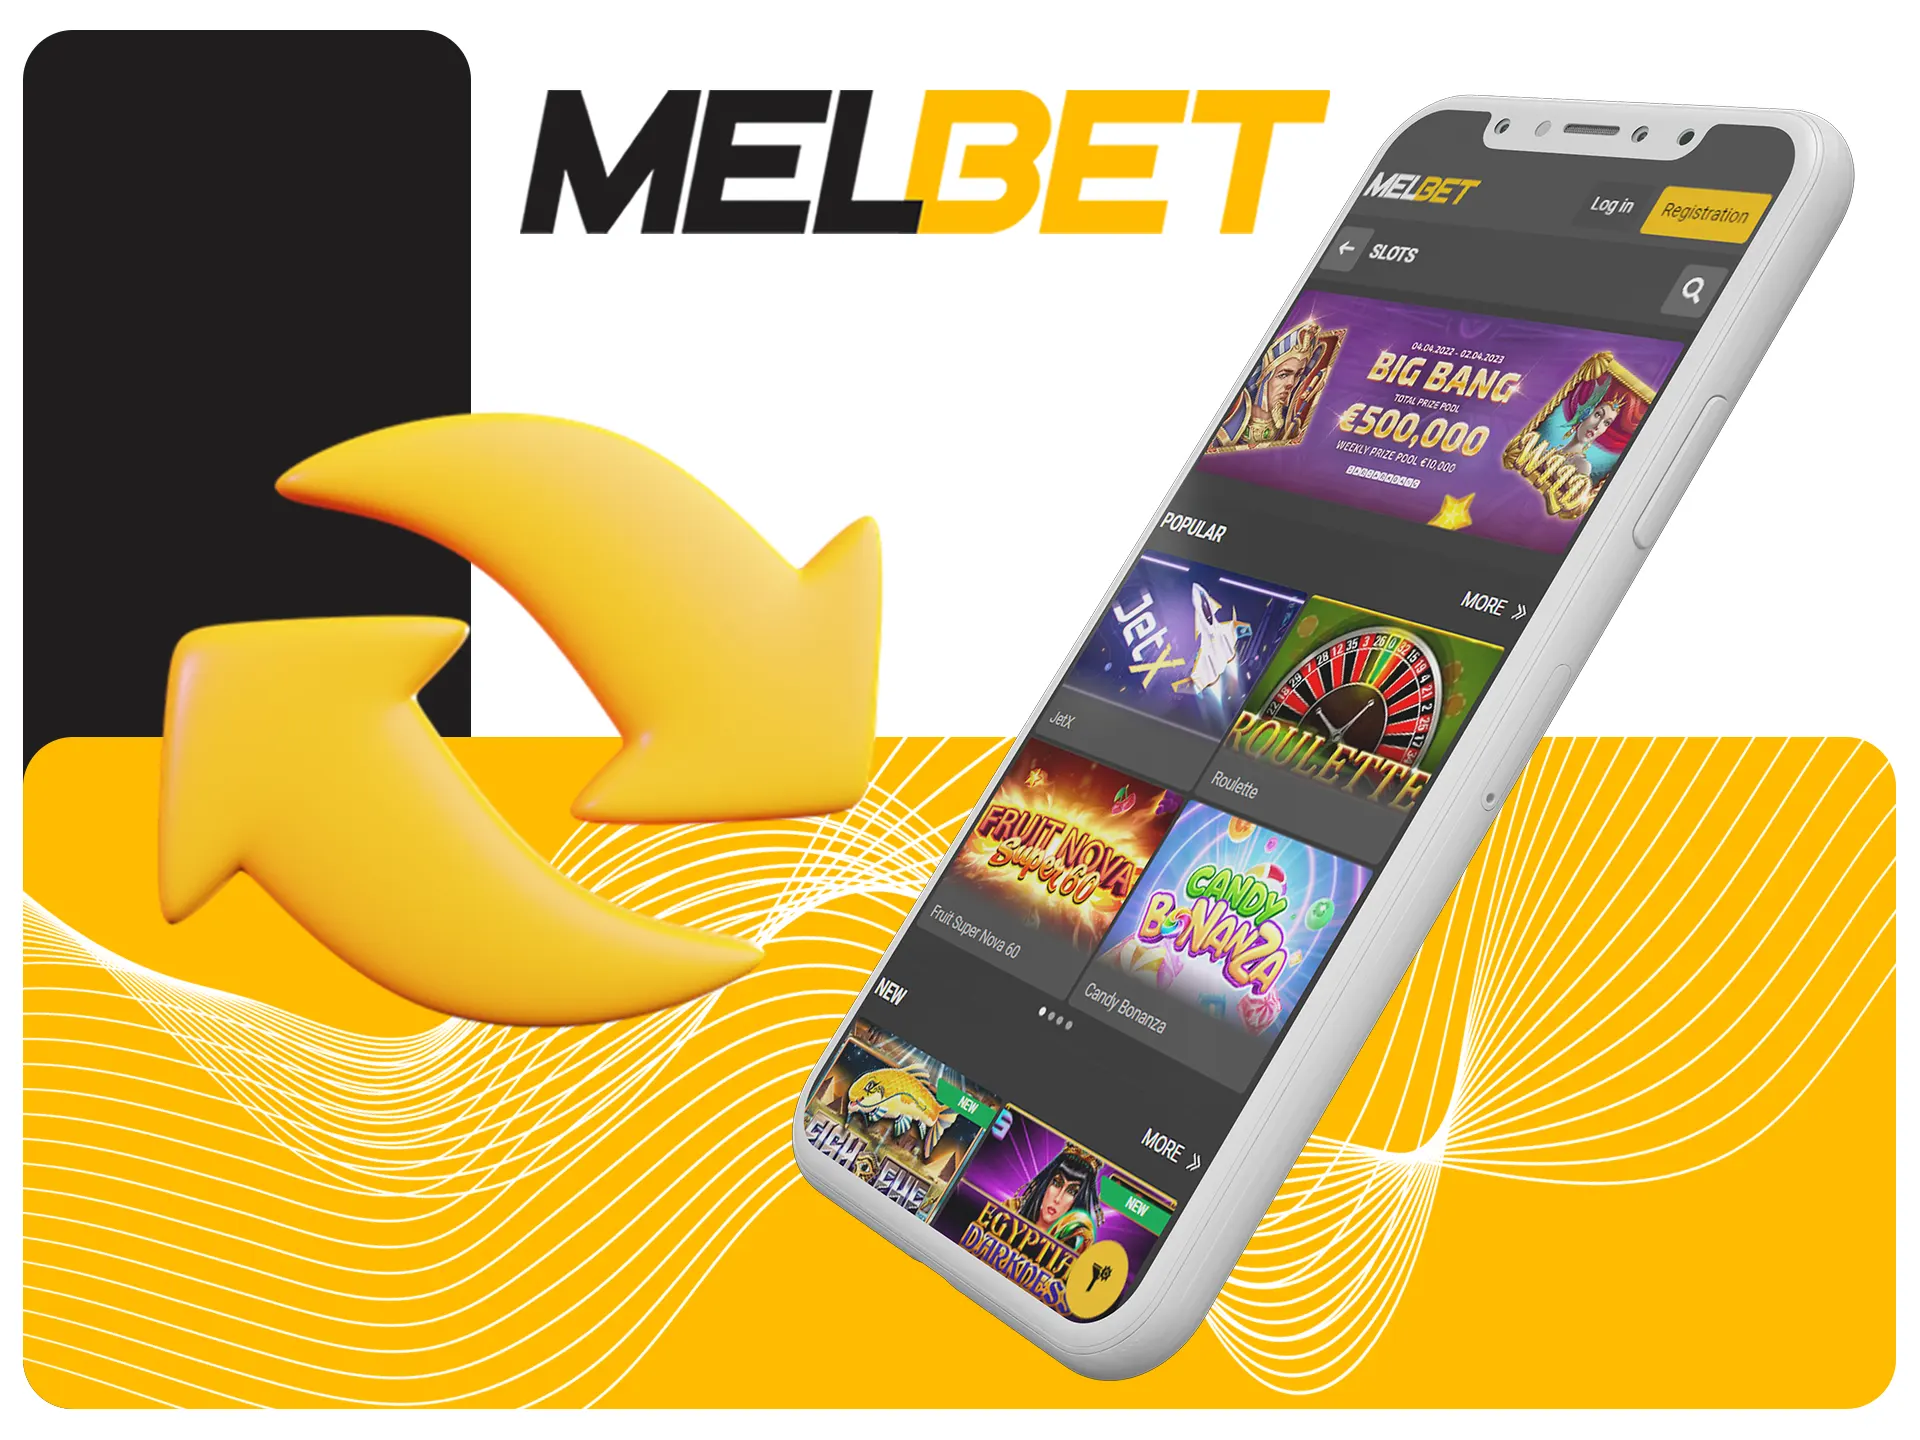 Melbet App Bangladesh: Your Ultimate Guide to Download, Registration, and Login